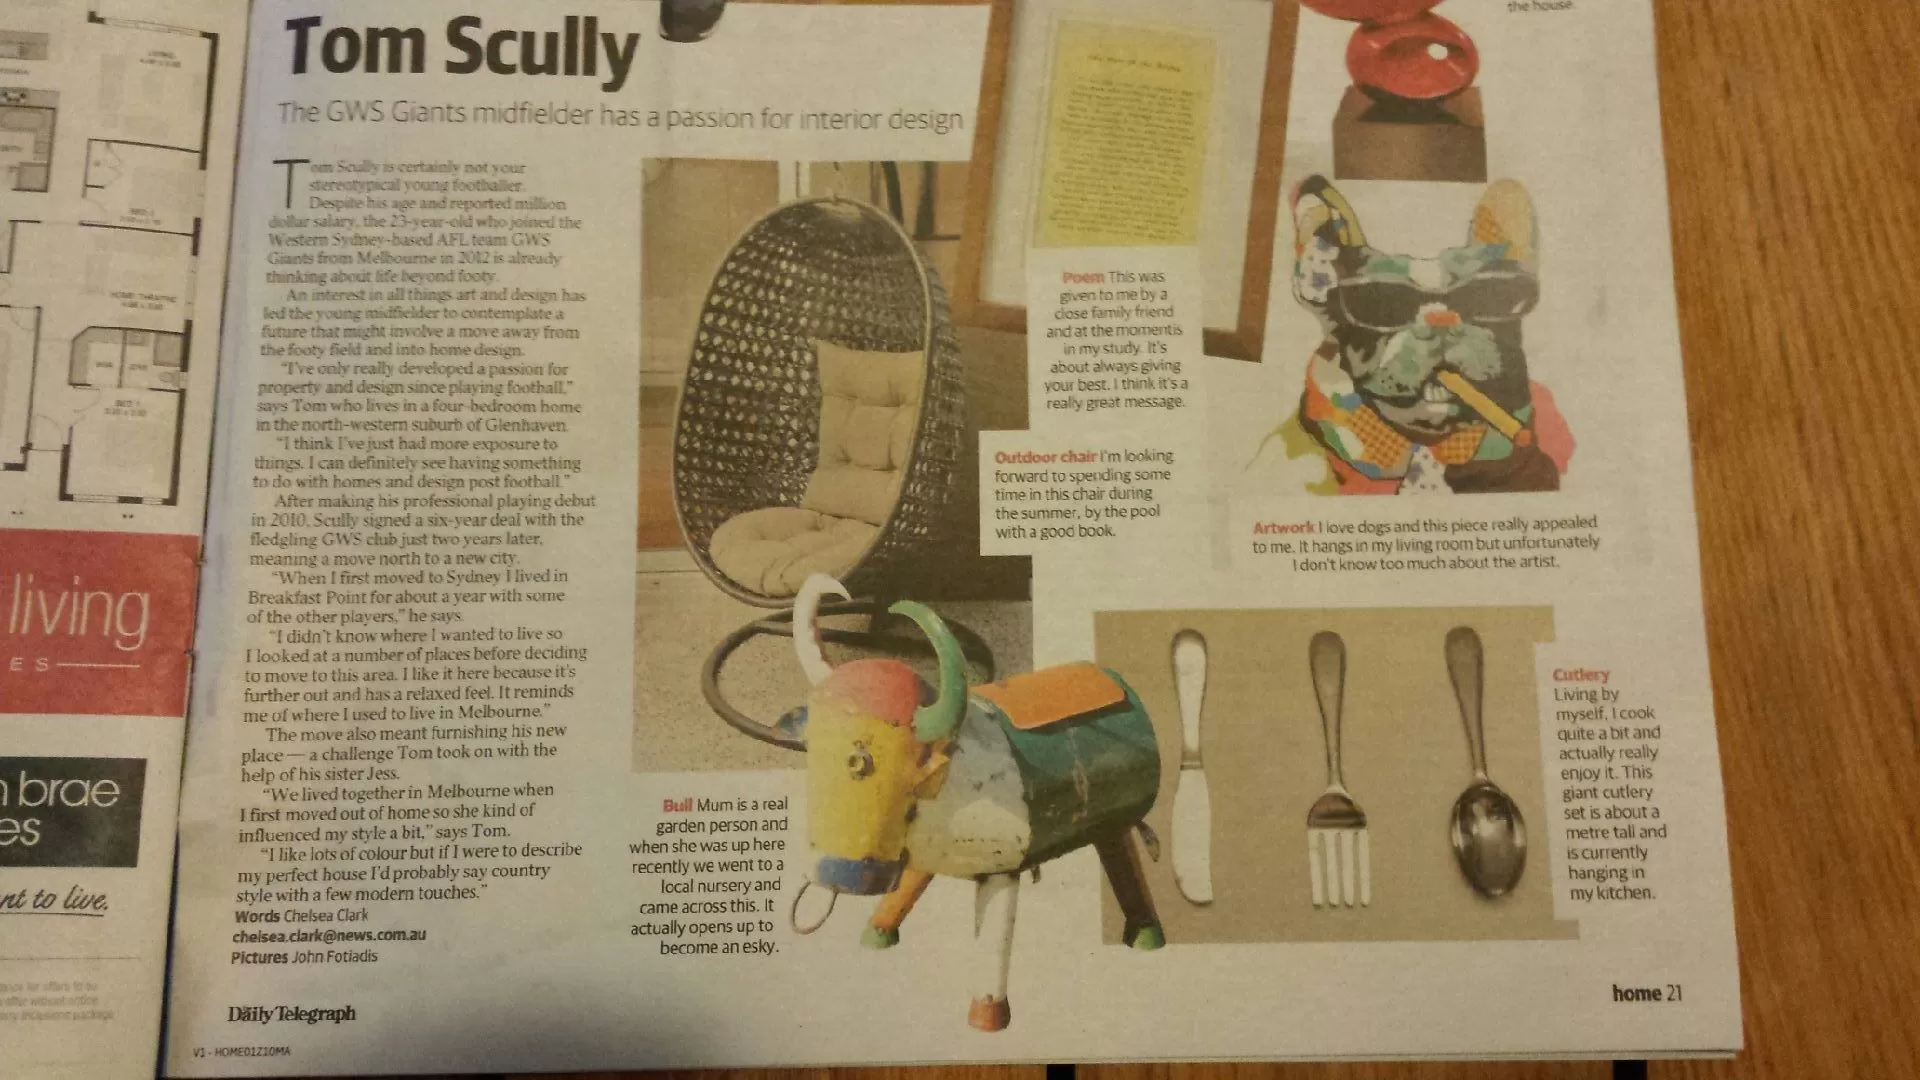 Daily Telegraph 29.08.14 – Tom Scully and his Mum love our Esky!